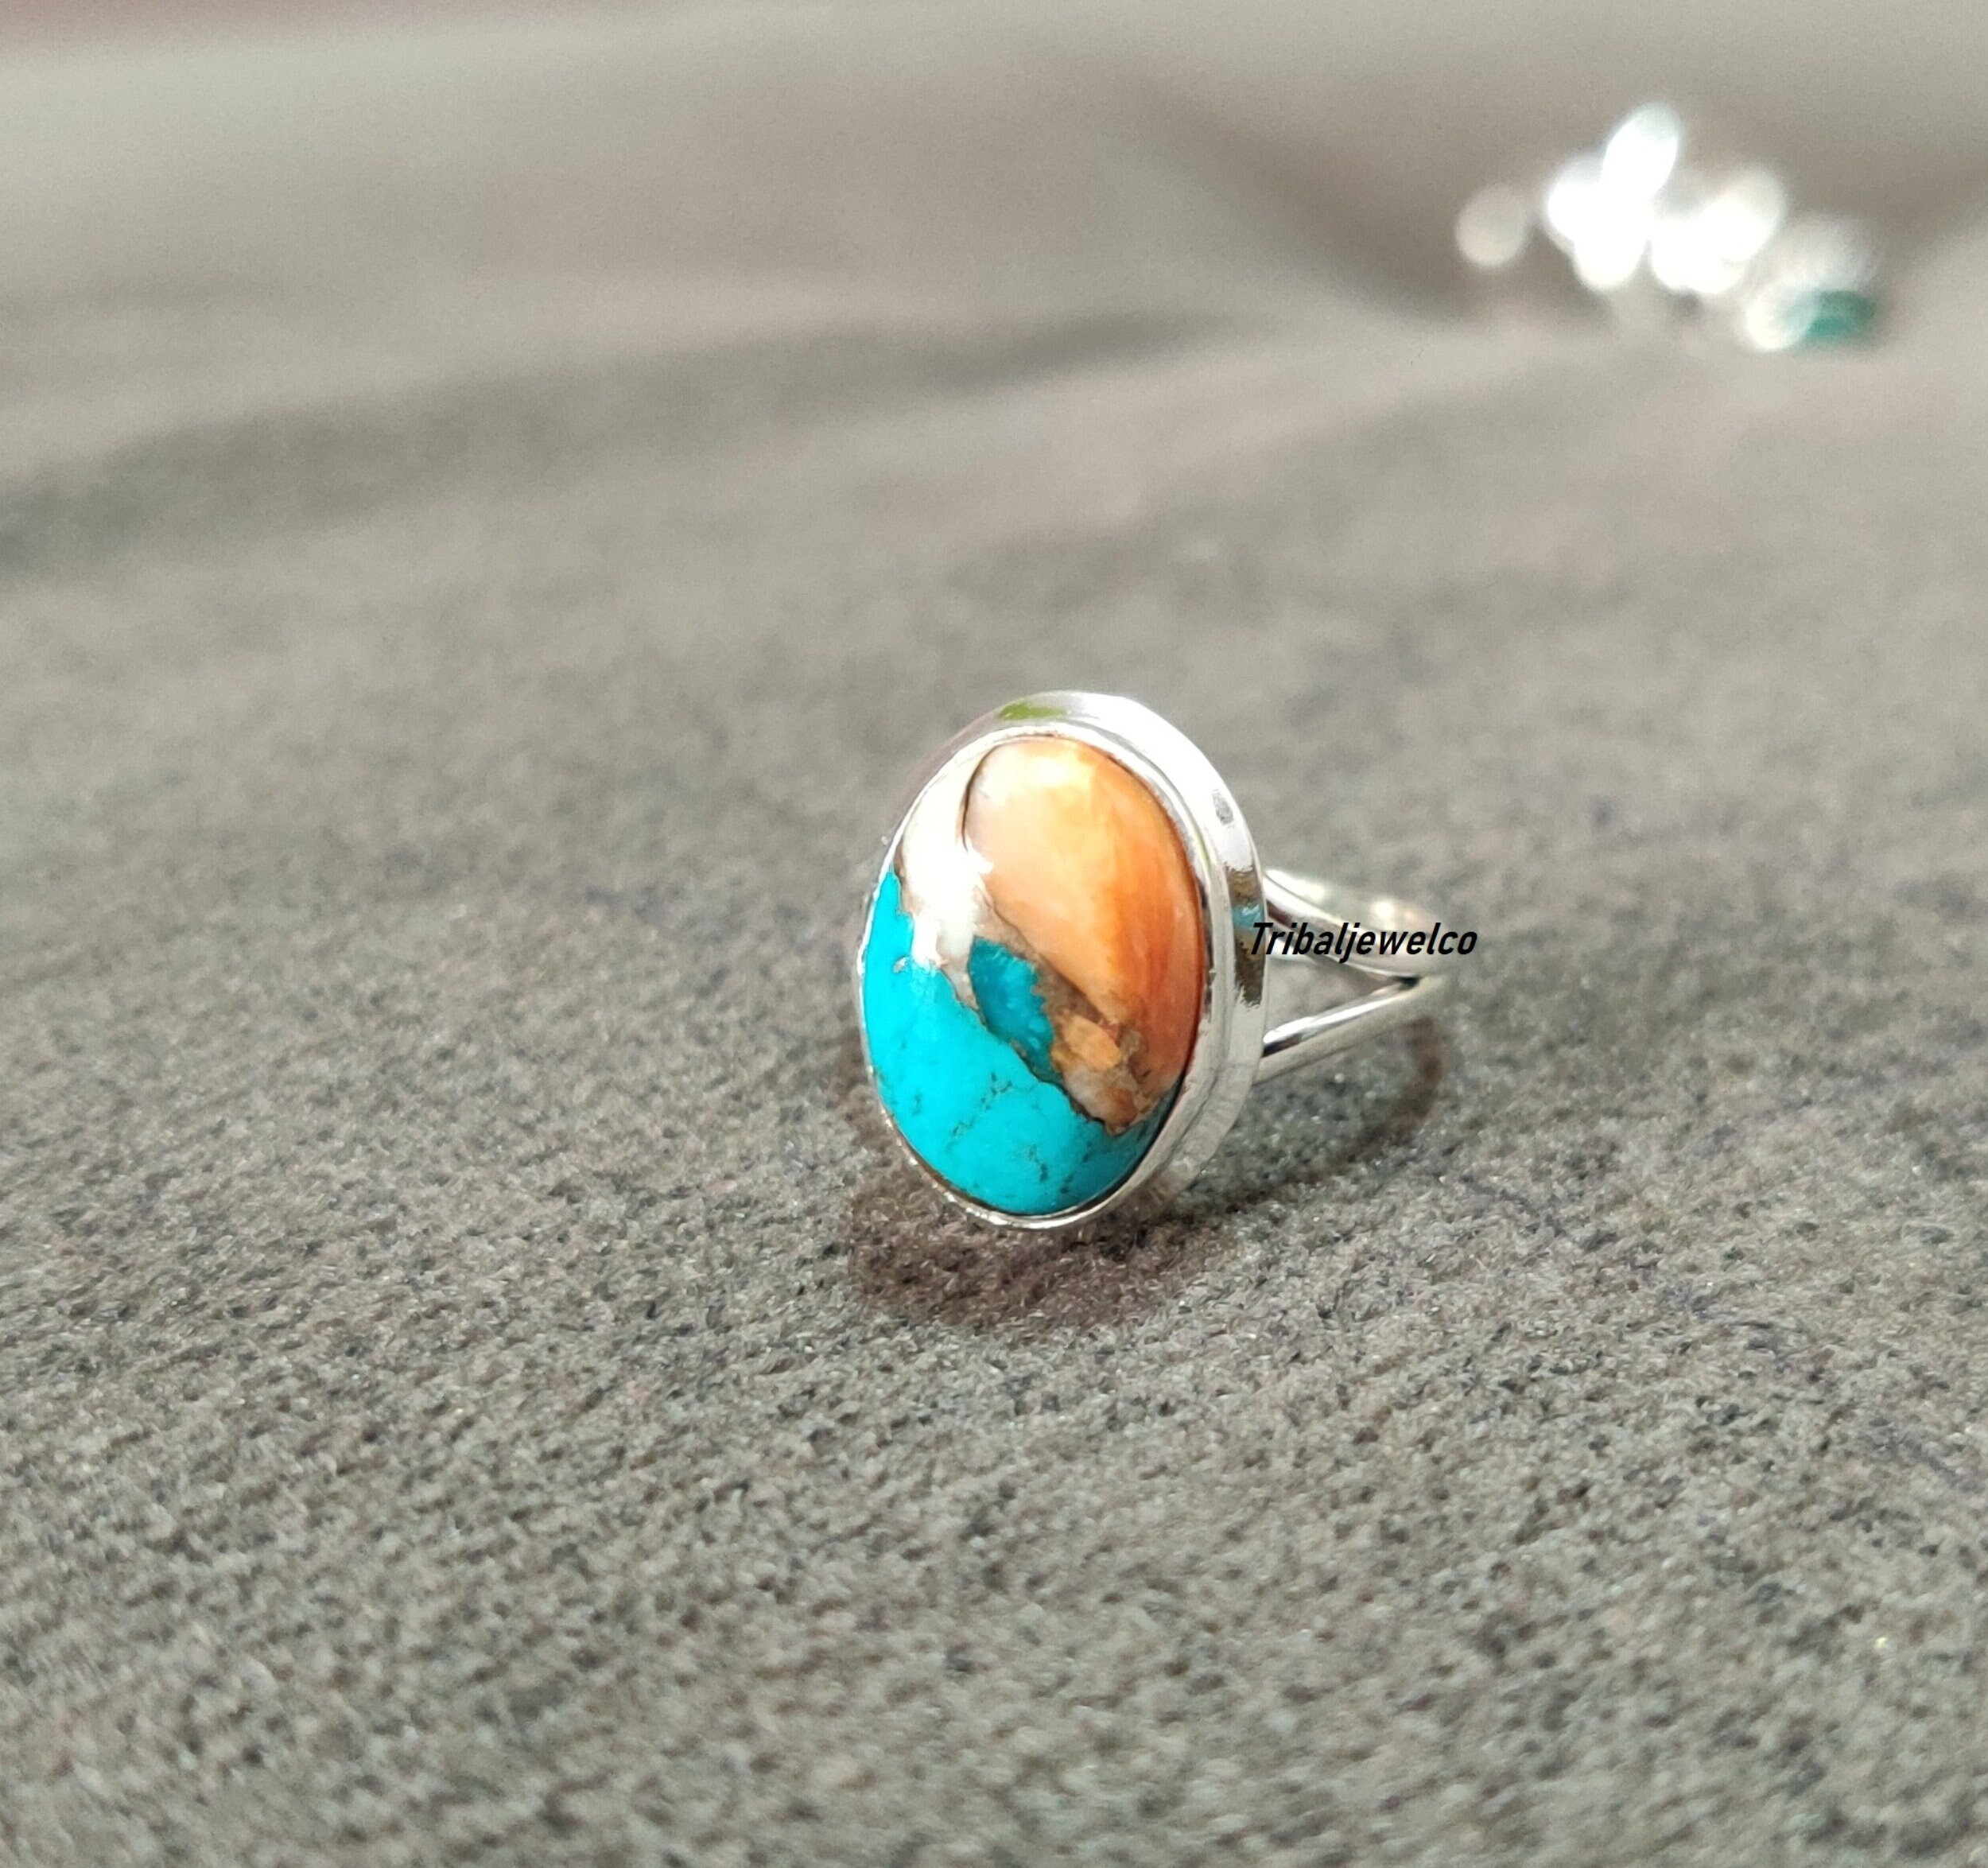 Handmade Mix Oyster Oval Stone Ring For Wedding Anniversary Gift For Her Oyster Copper Turquoise Solid 925 Sterling Silver Ring For Women